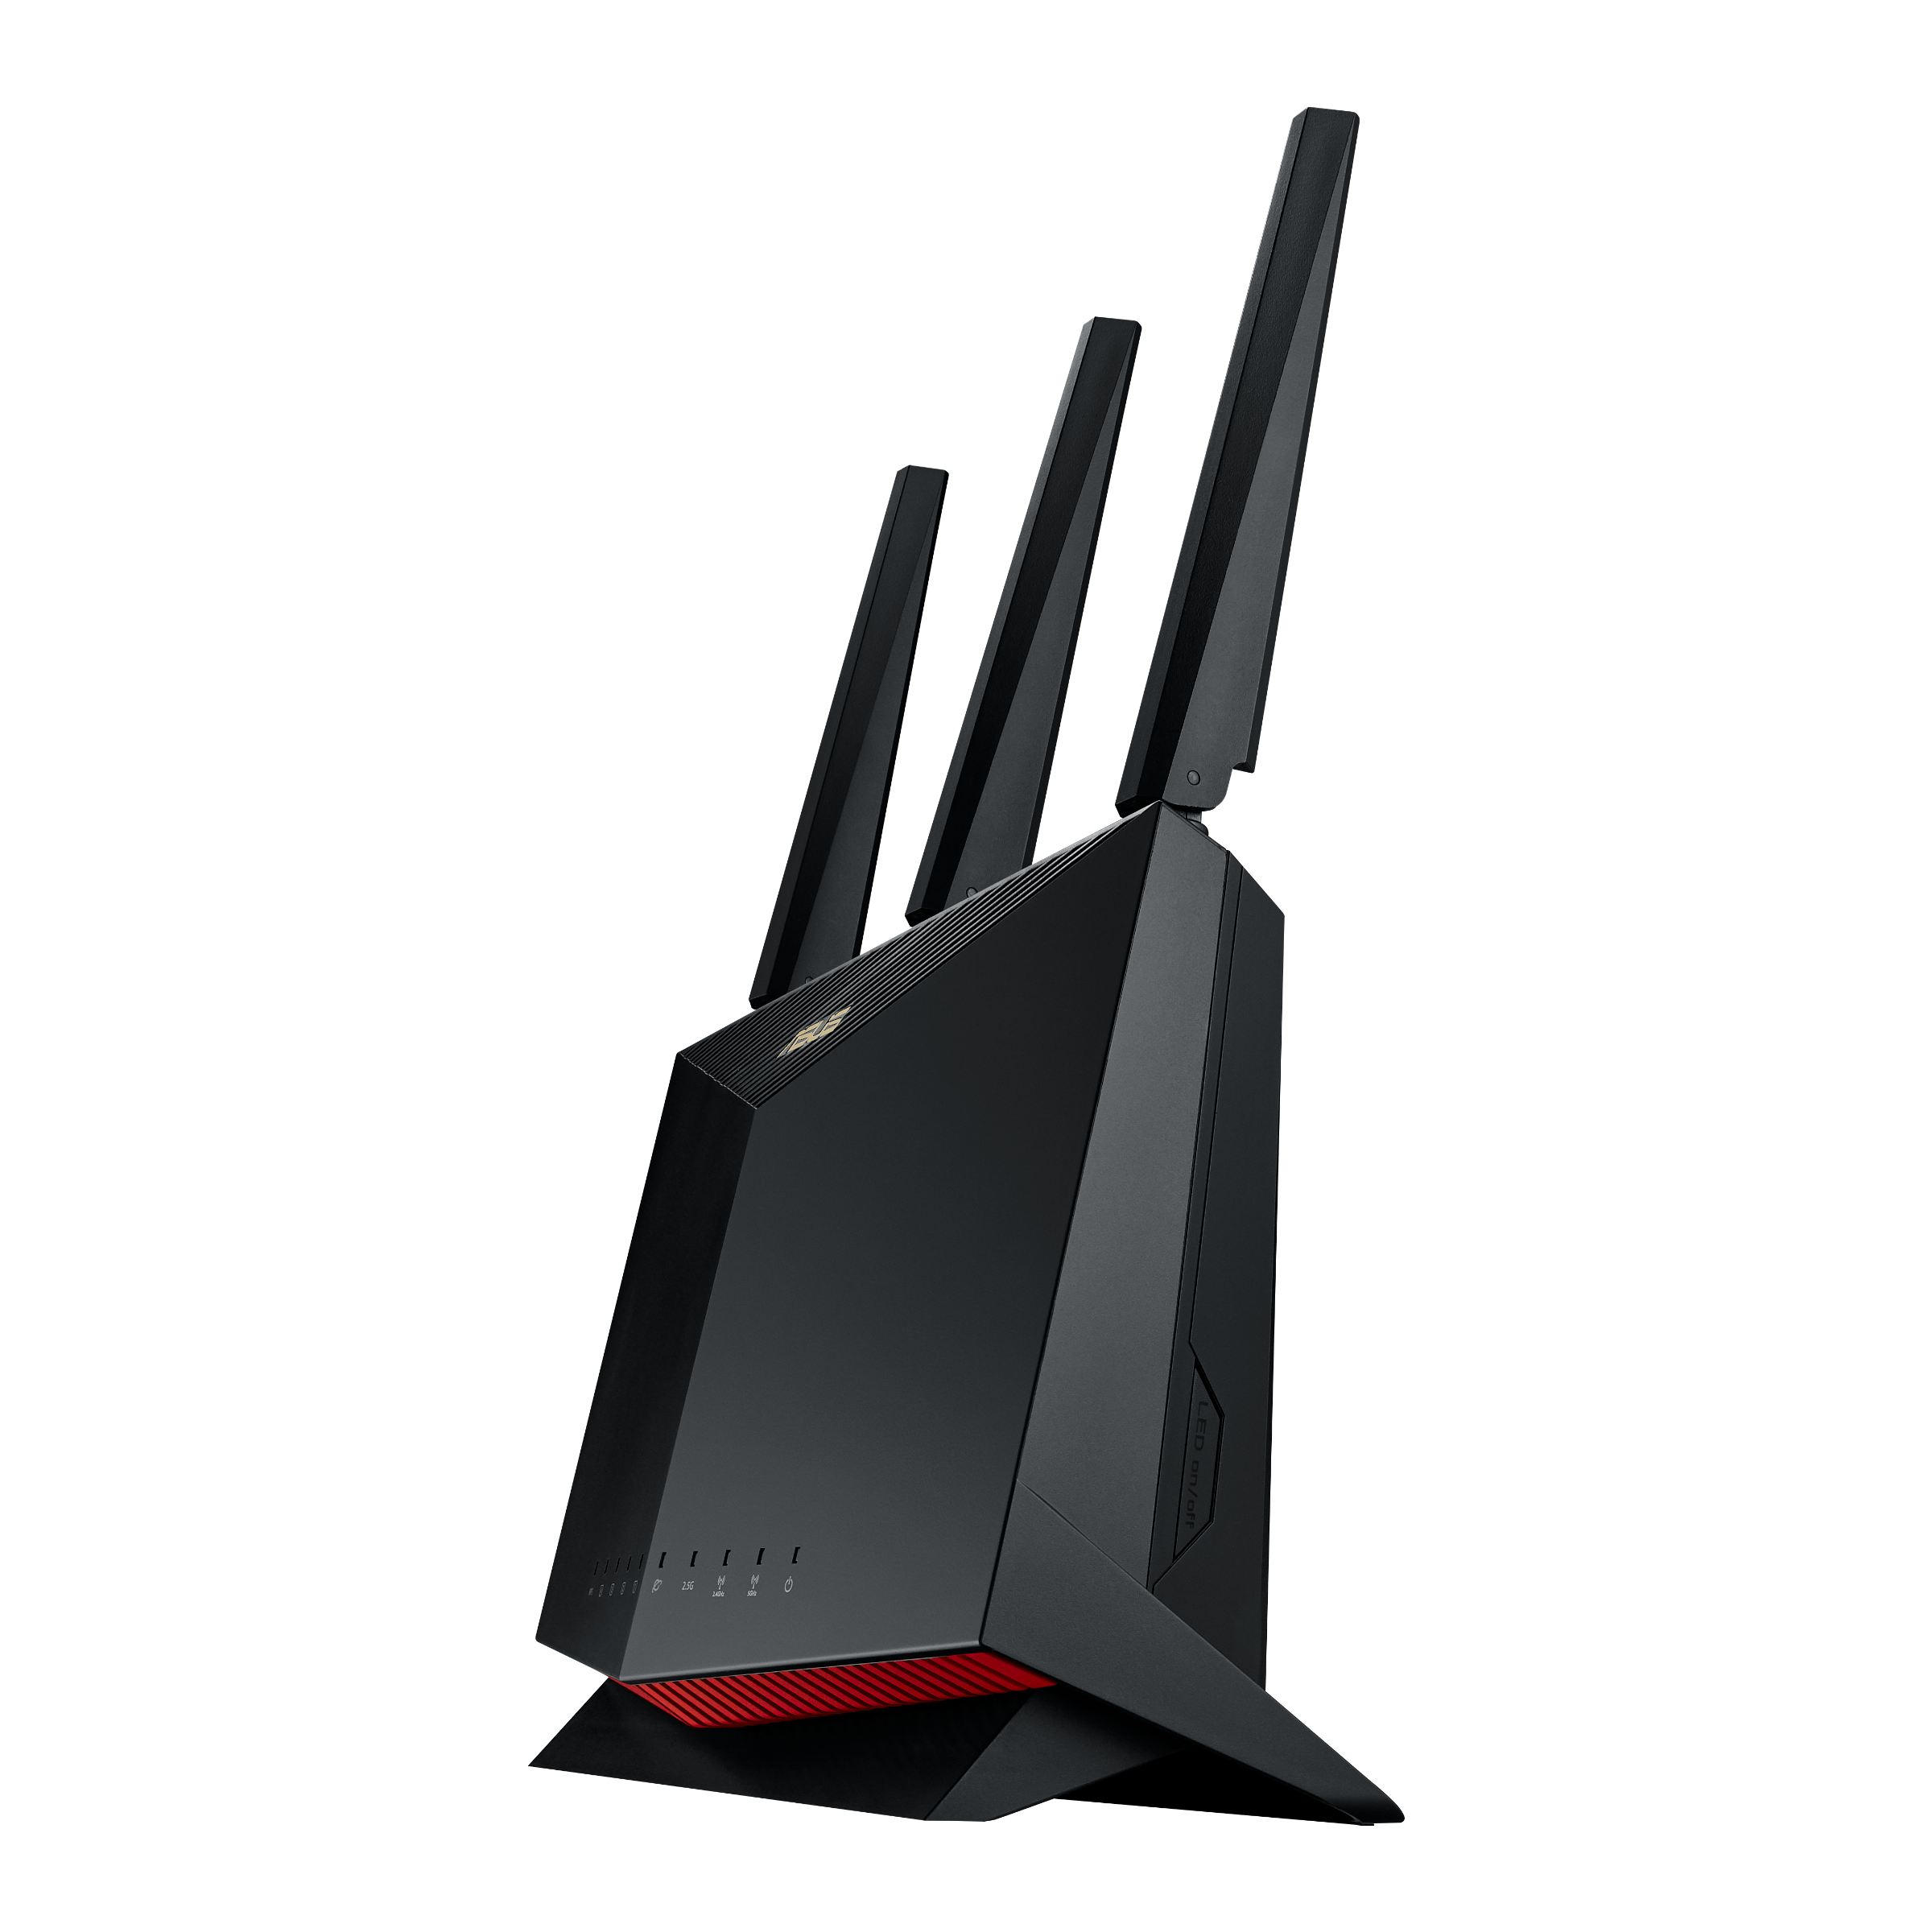 RT-AX86U Pro｜WiFi Routers｜ASUS USA